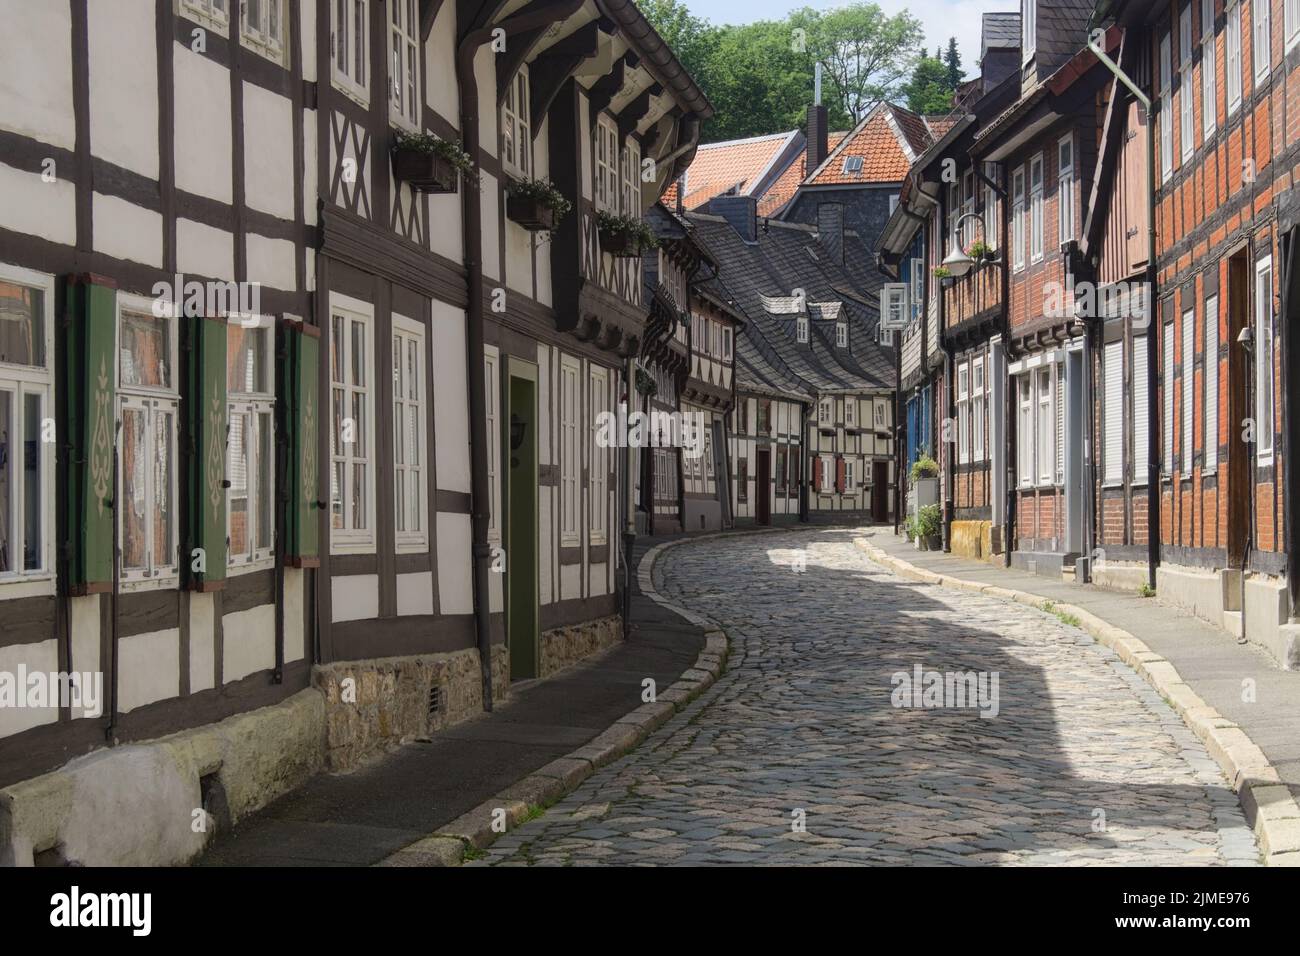 Goslar - Old town alley with numerous half-timbered houses, Germany Stock Photo